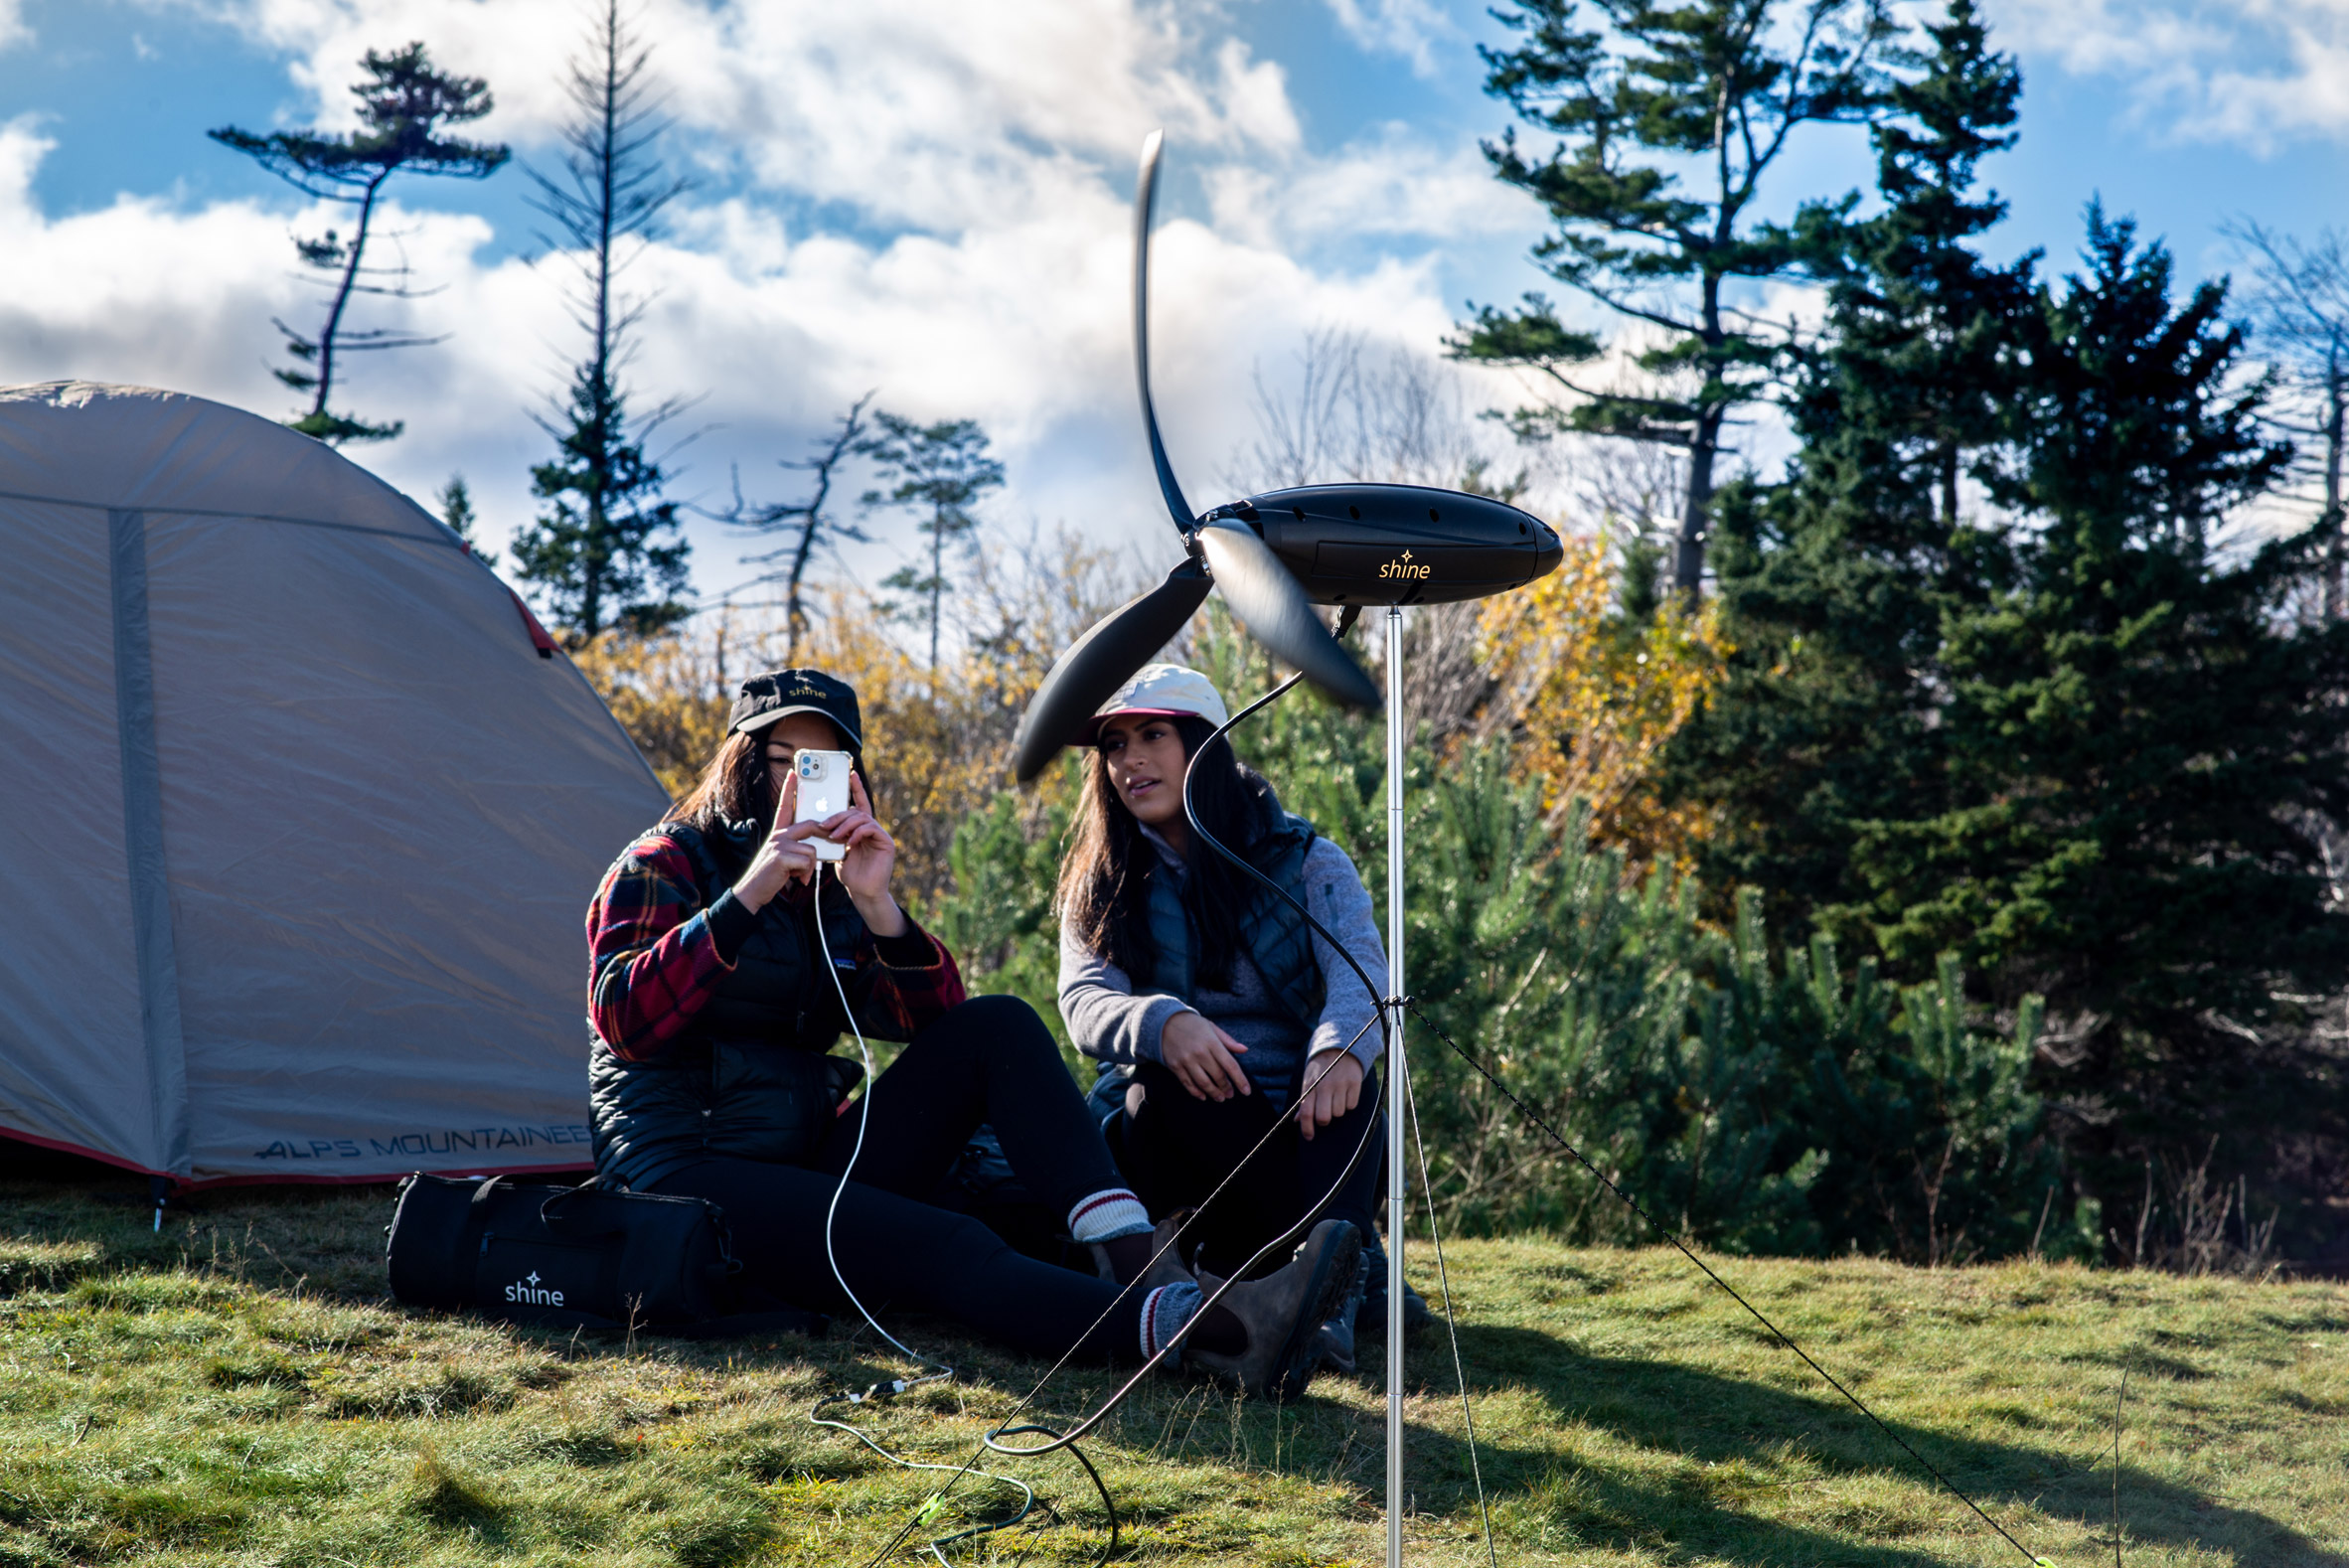 Wind turbine set up in front of two people sitting in front of their tent in the wilderness